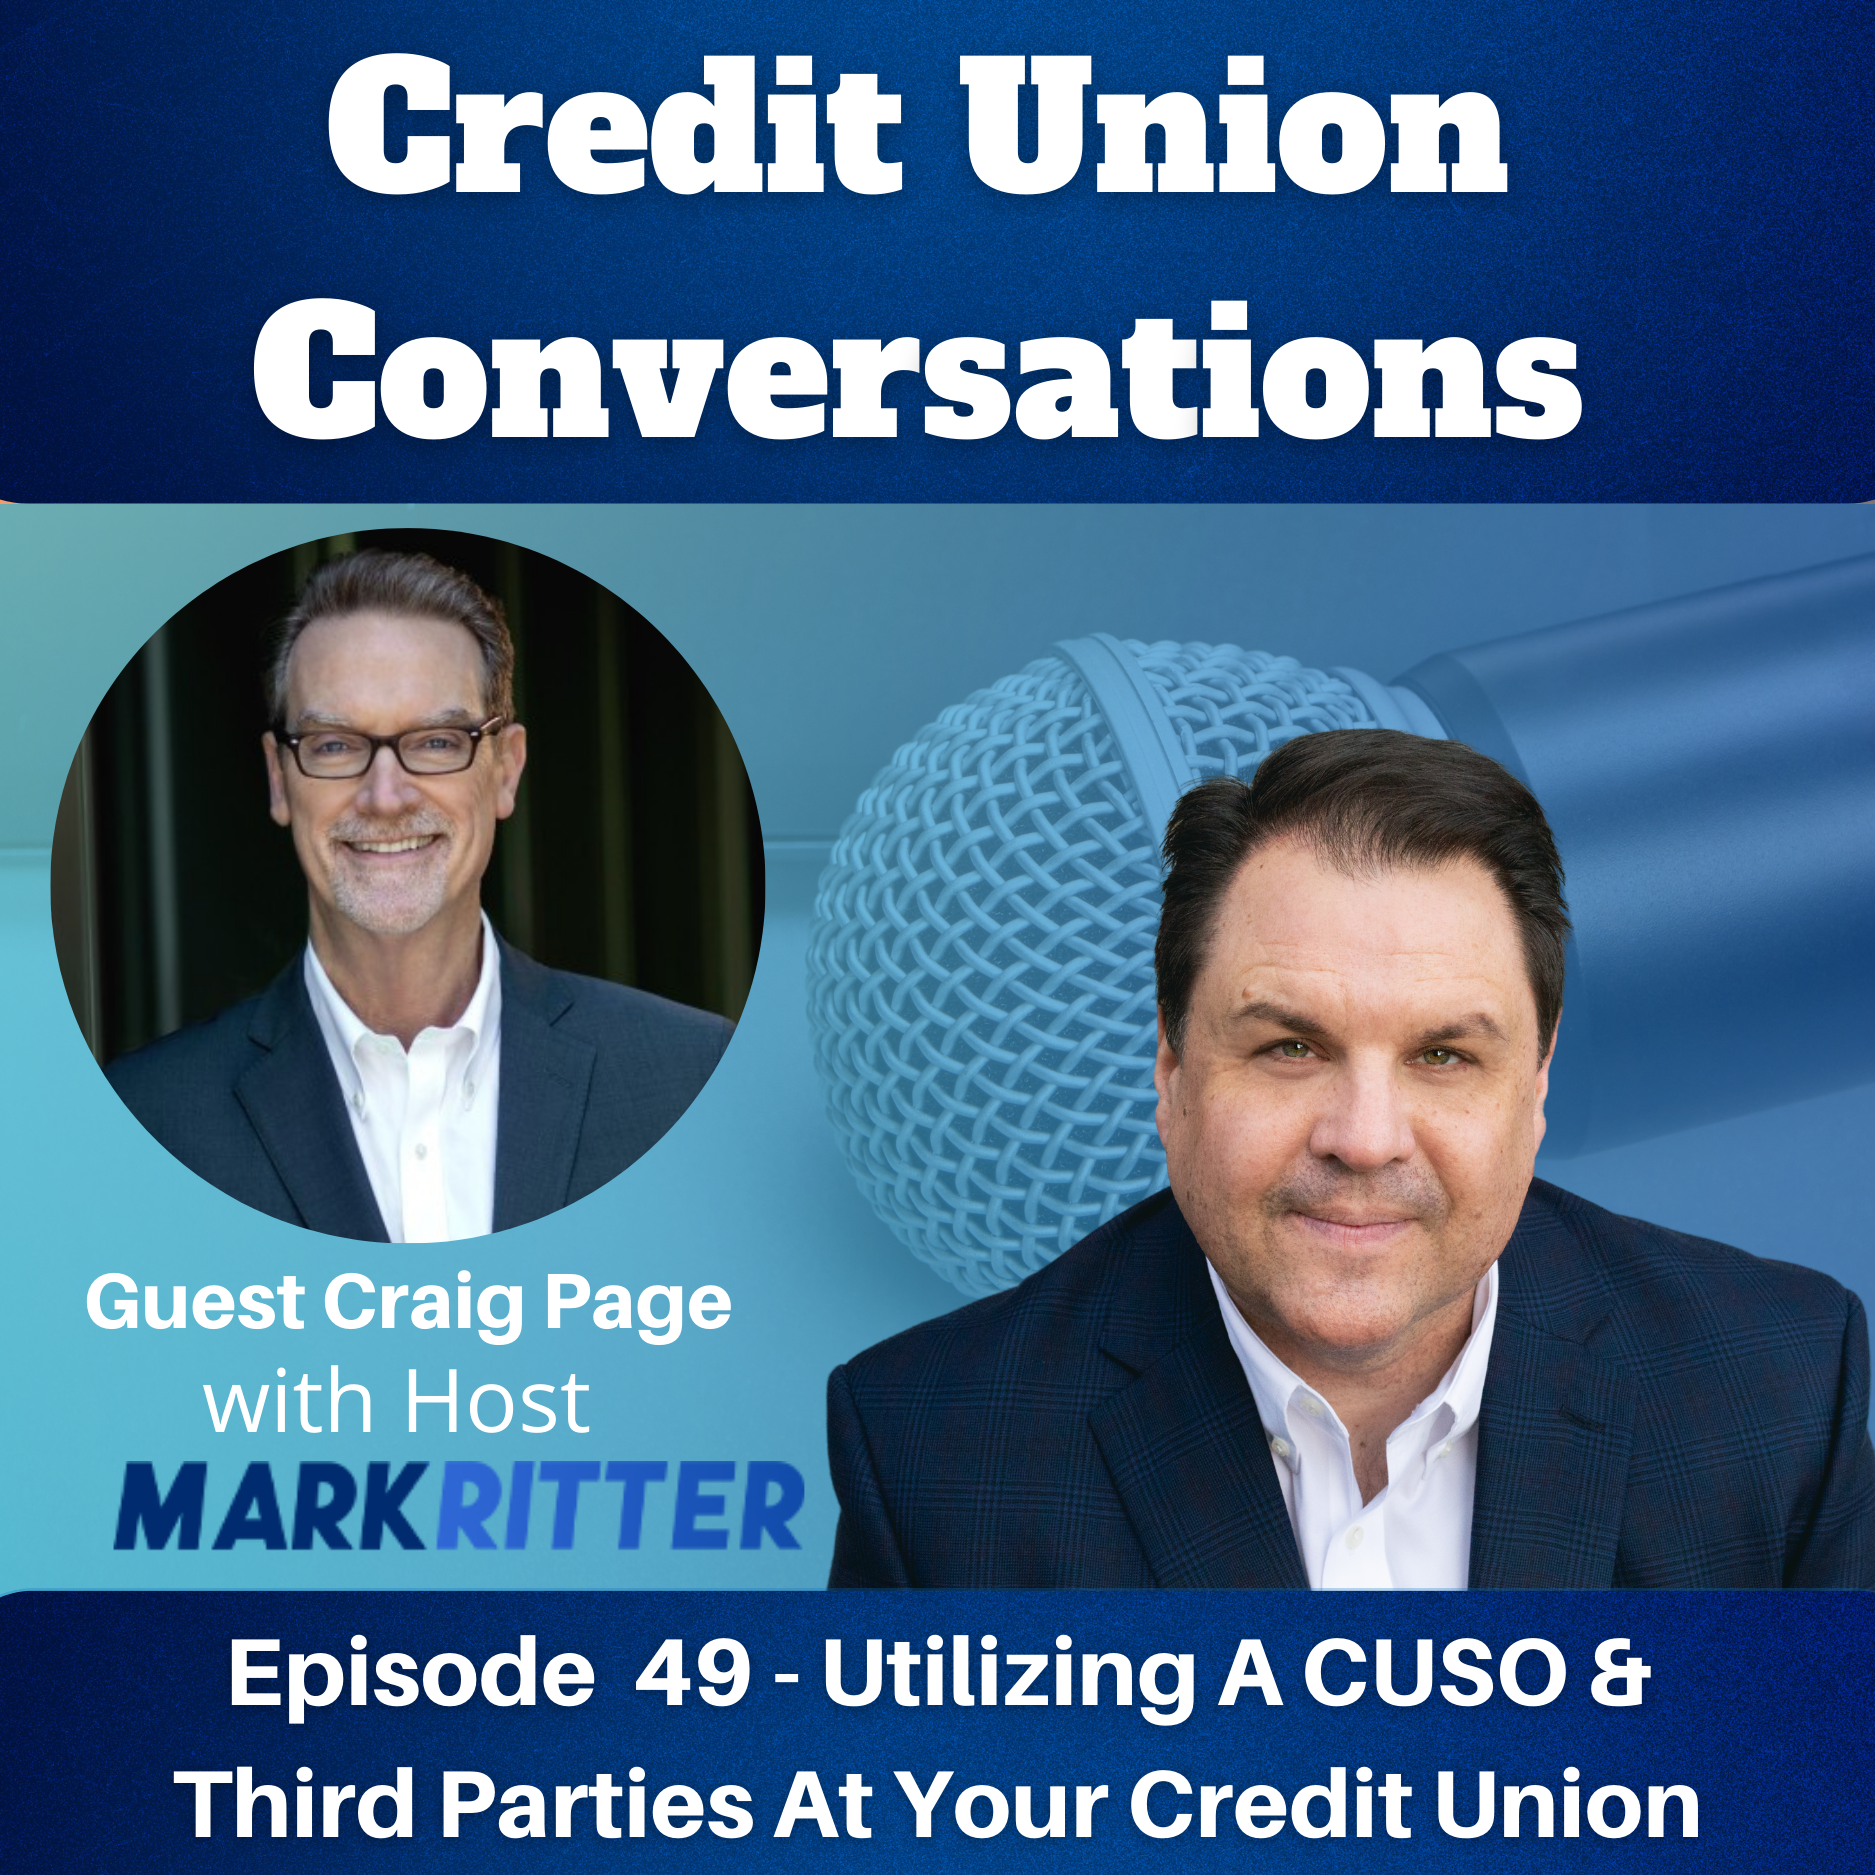 Utilizing A CUSO & Third Parties At Your Credit Union